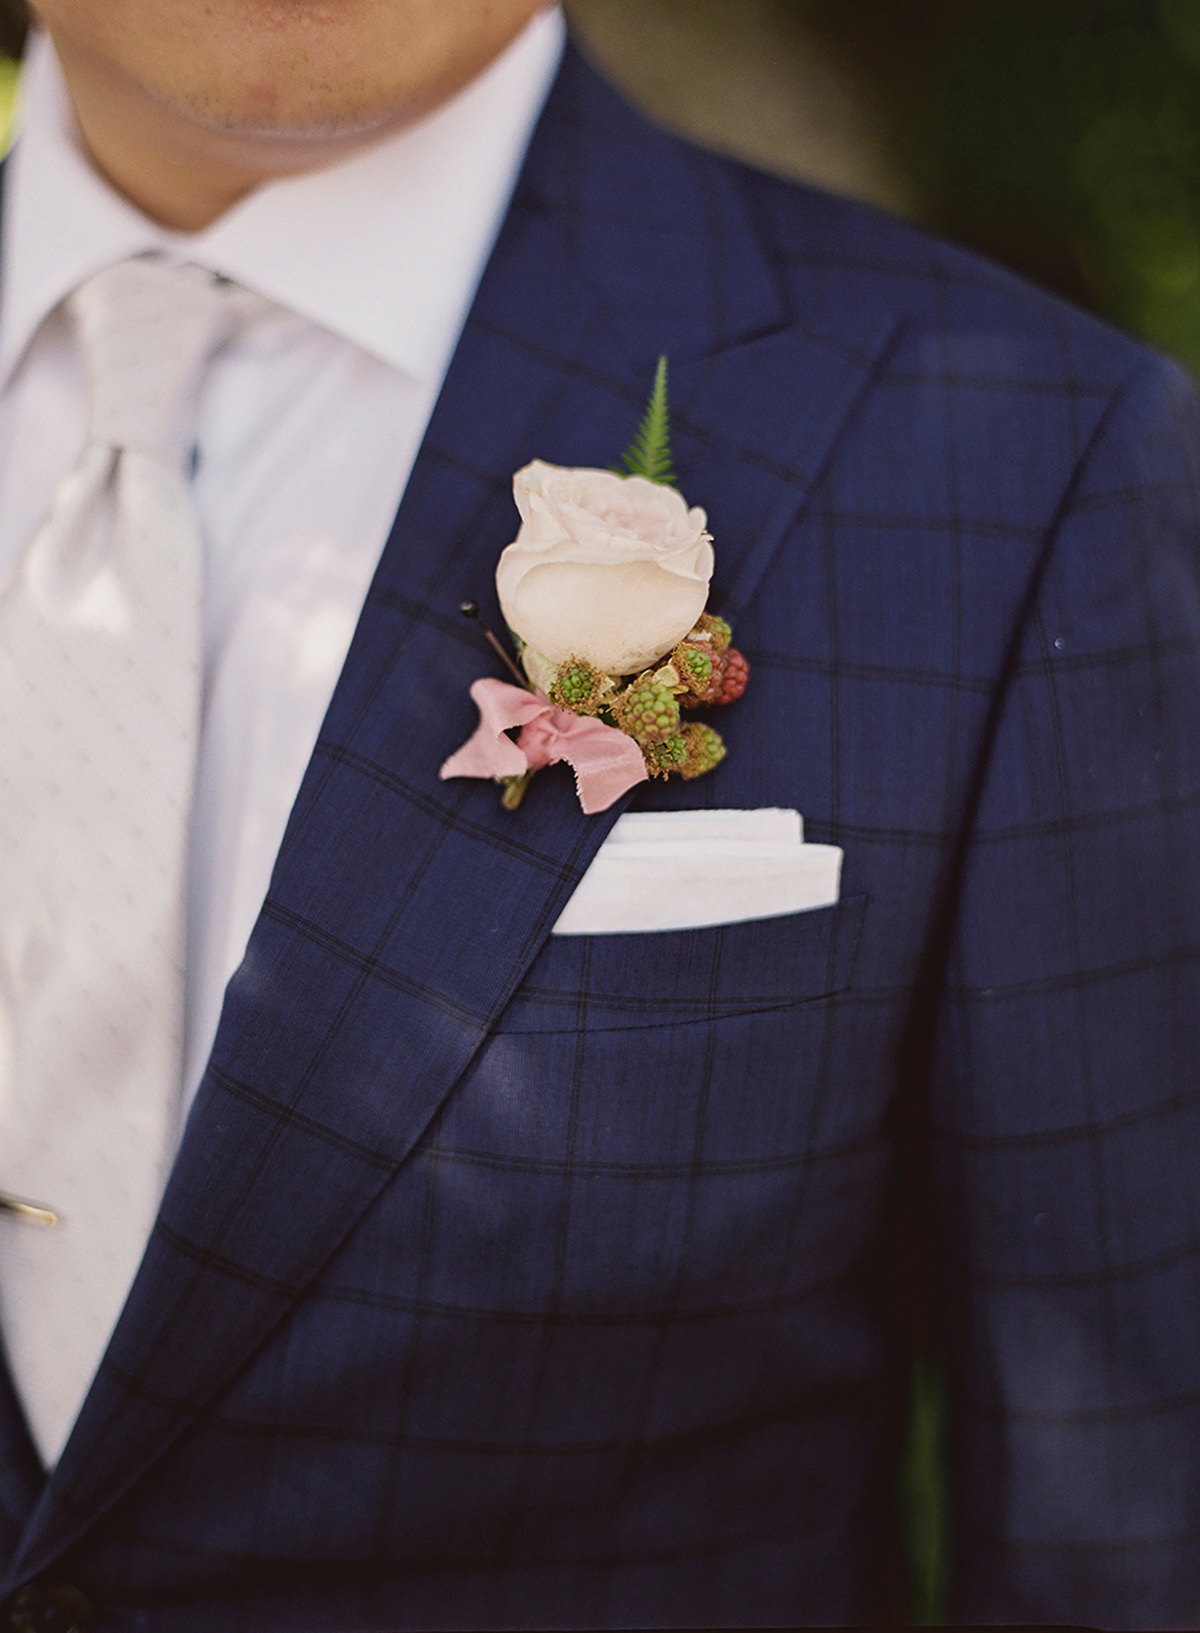 Checkered suit and boutonniere